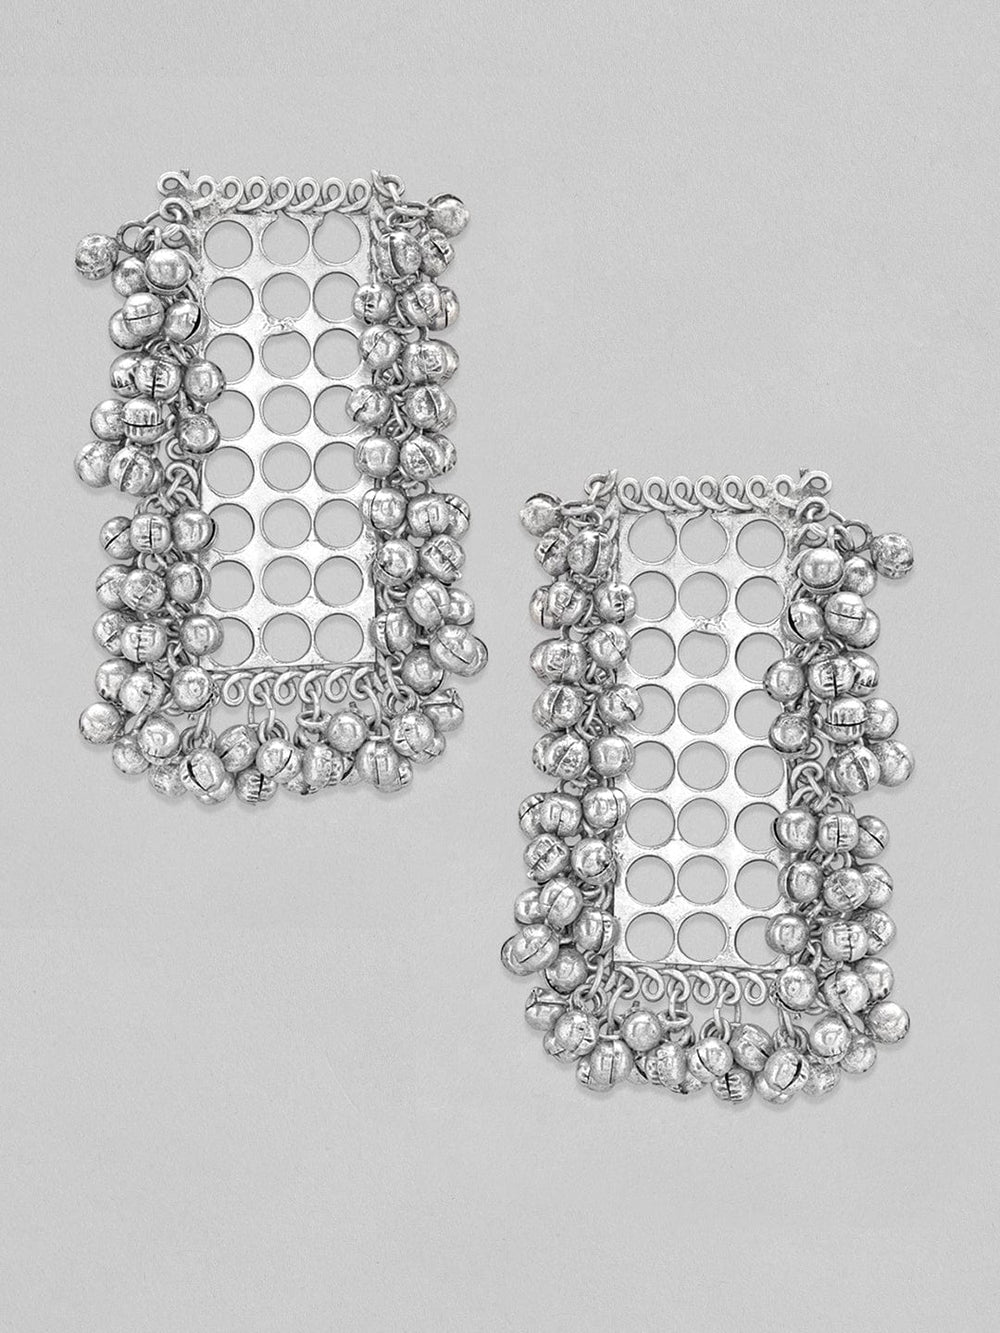 Rubans Silver Oxidised Earrings With Square Design And Silver Beads Earrings